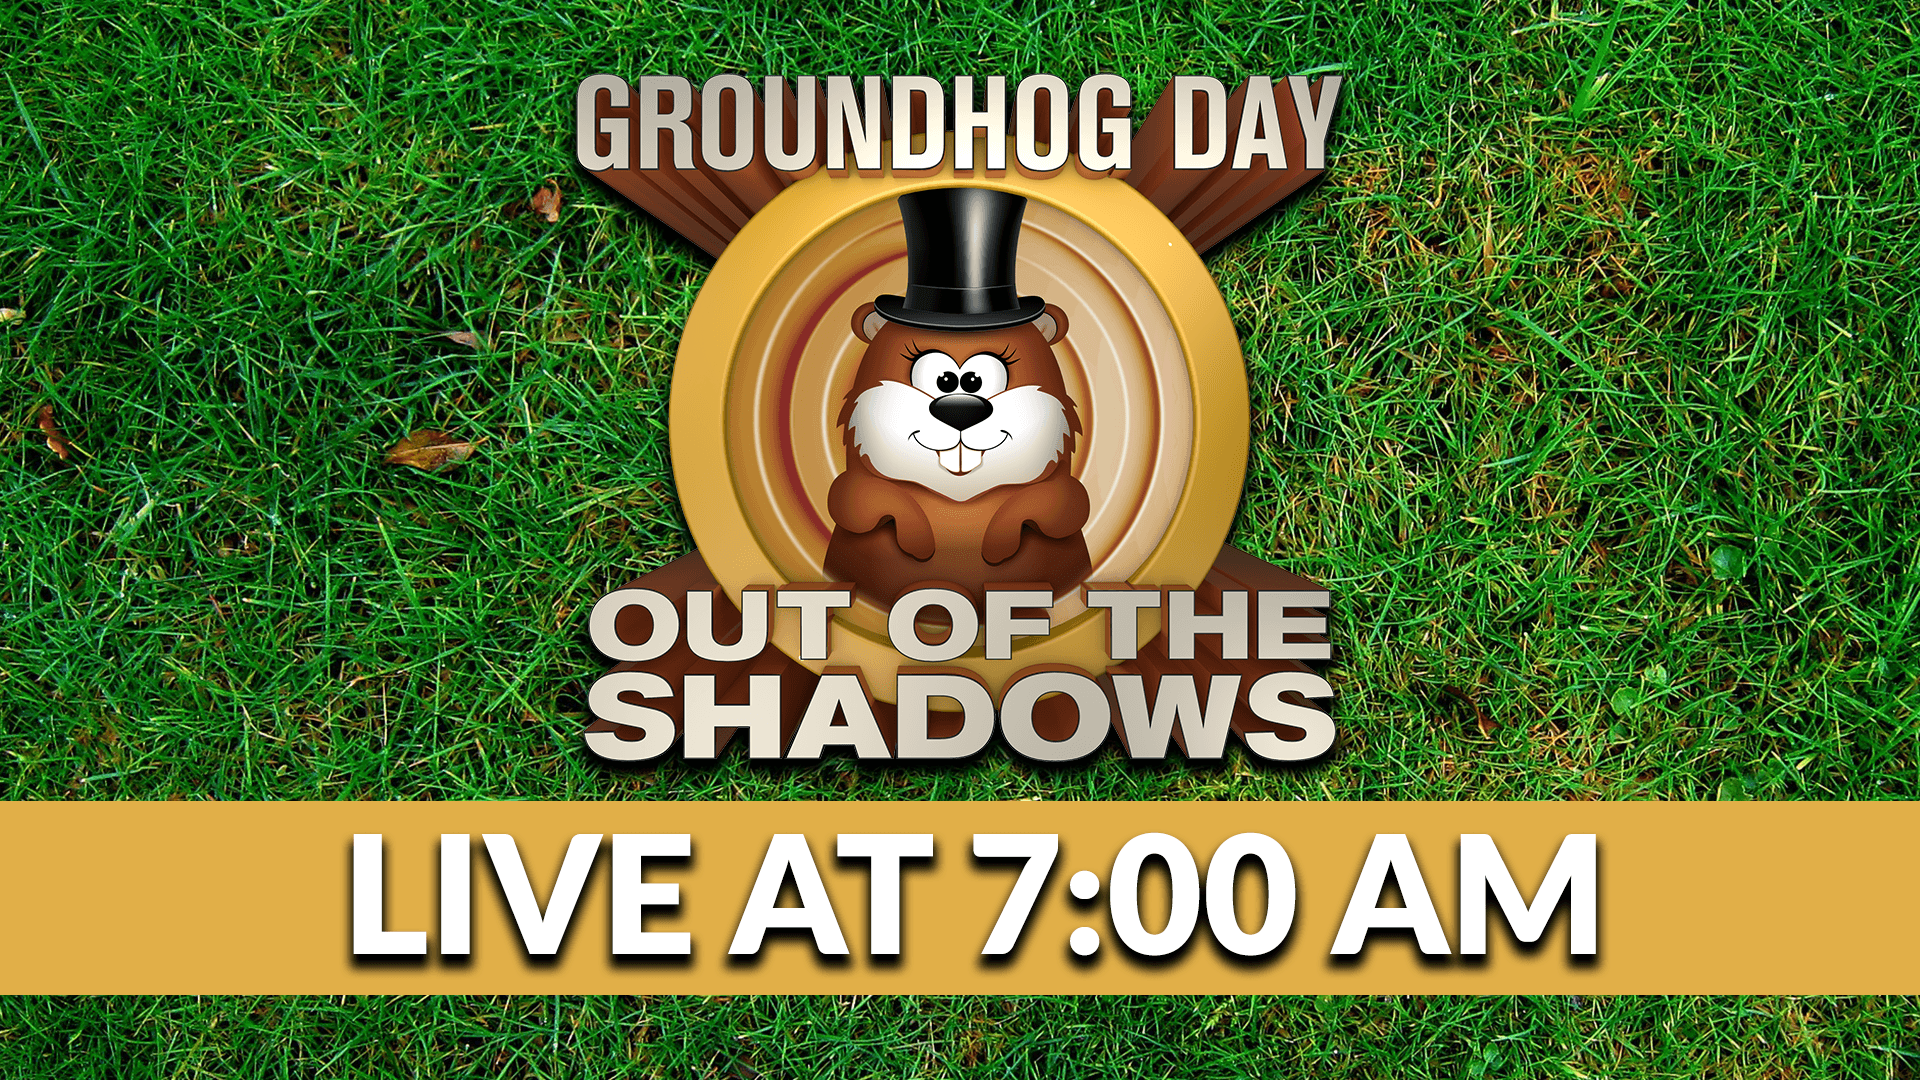 Groundhog Day: Out of the Shadows